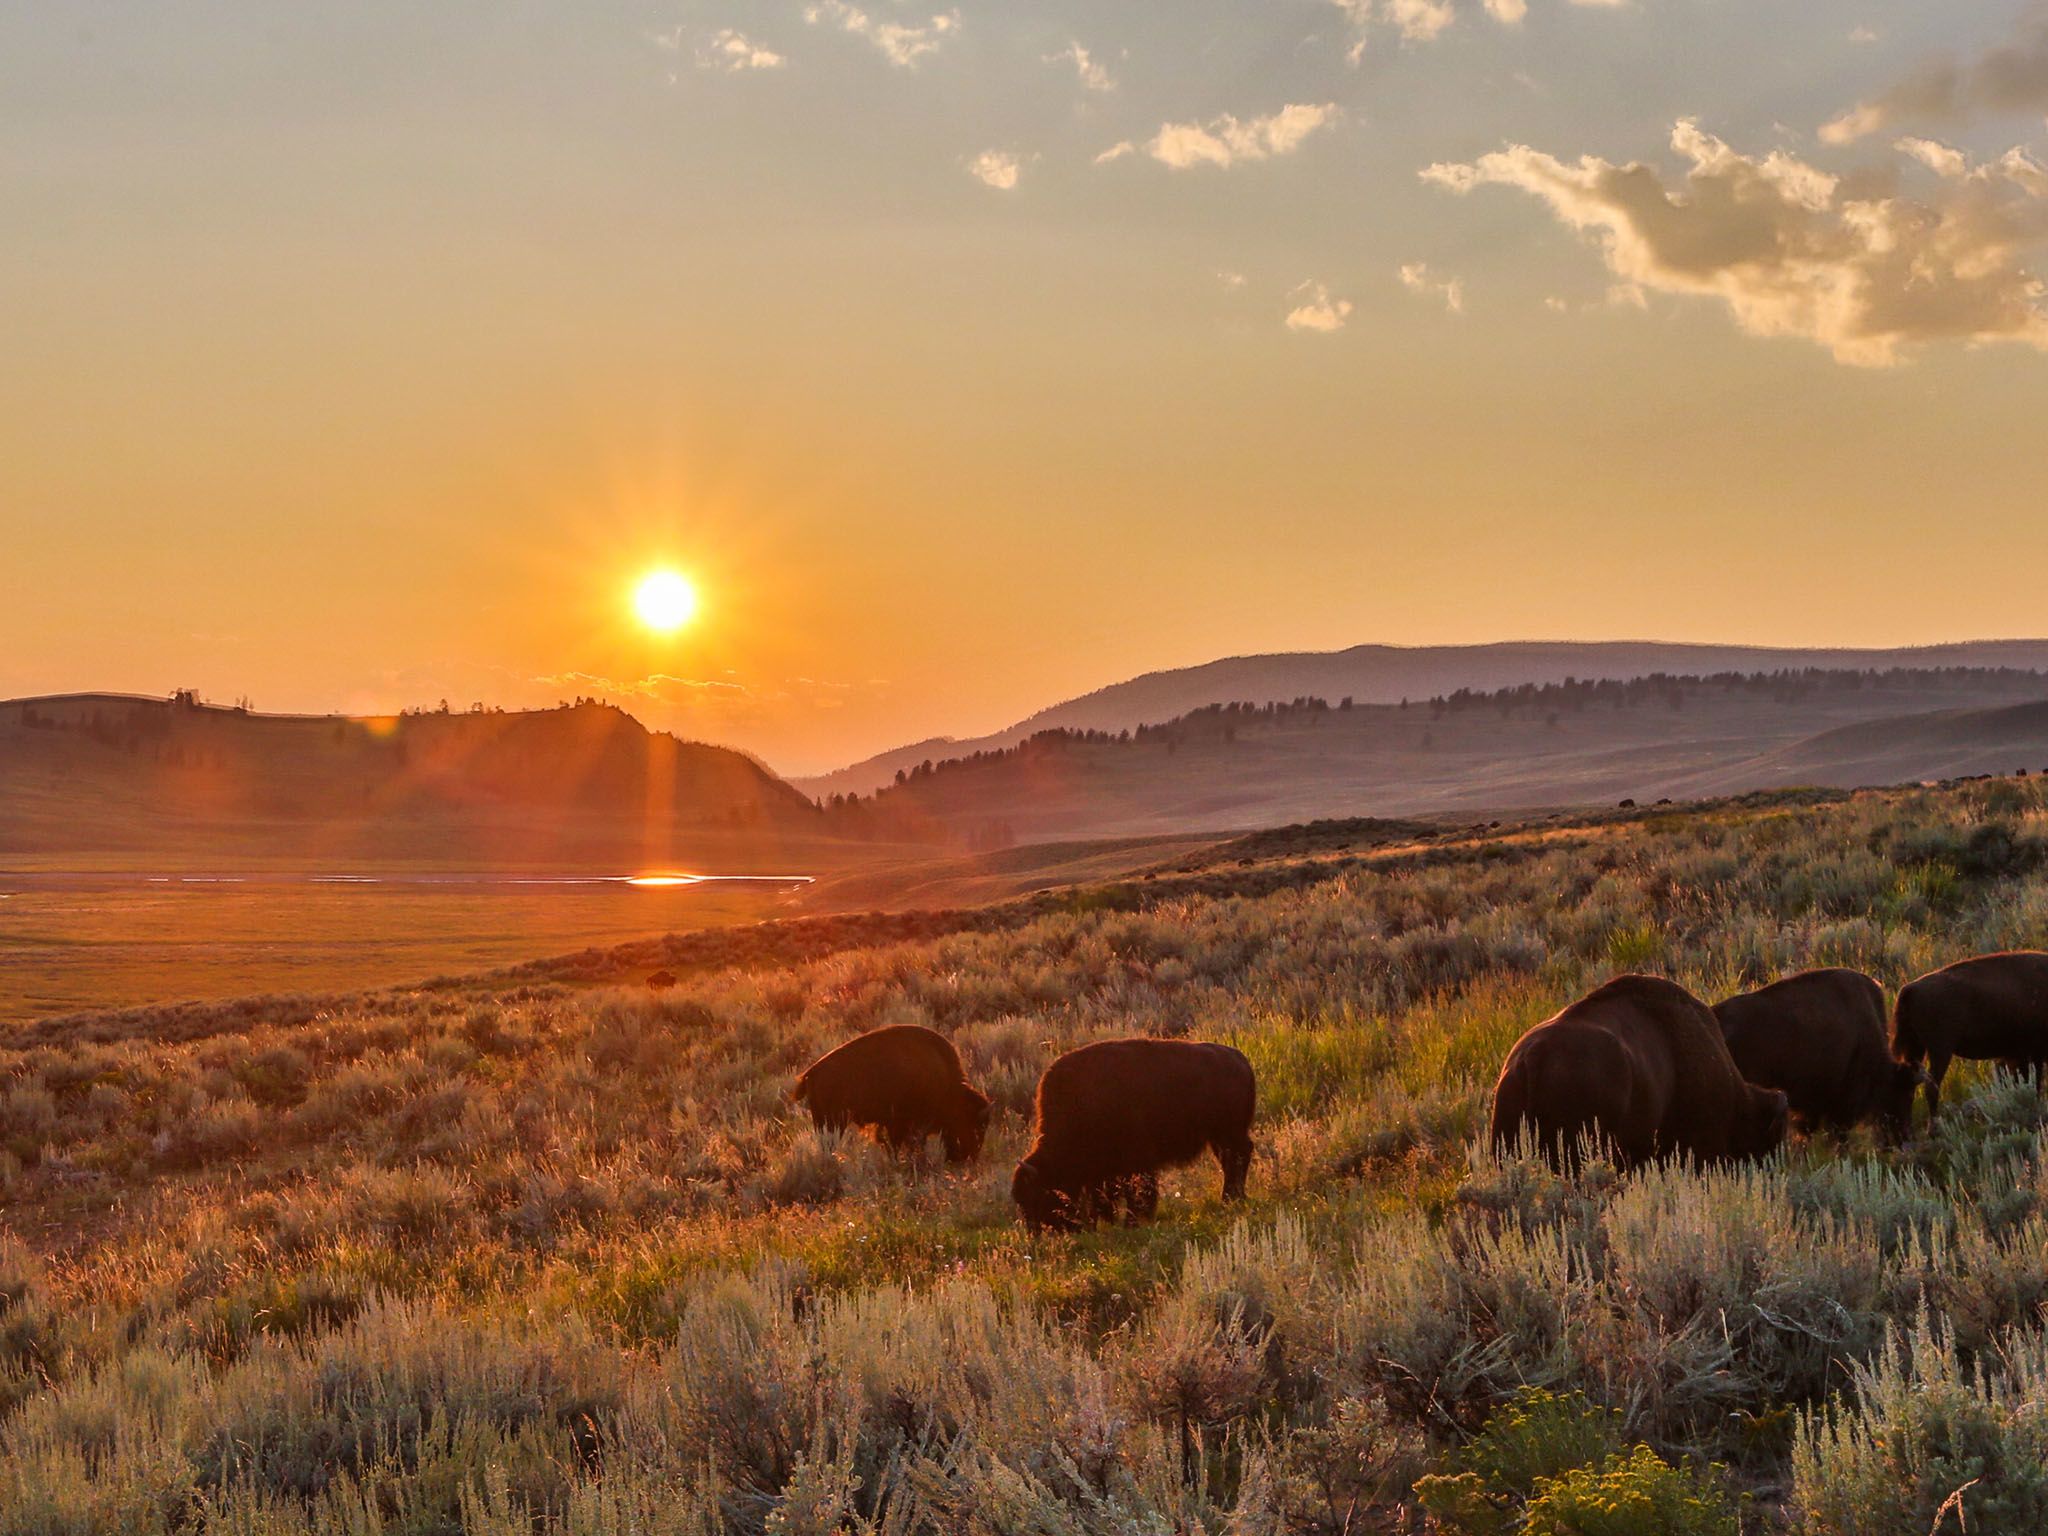 Yellowstone, WYO.: Bison herd in summer evening light during the bison rut. This image is from... [Photo of the day - November 2015]